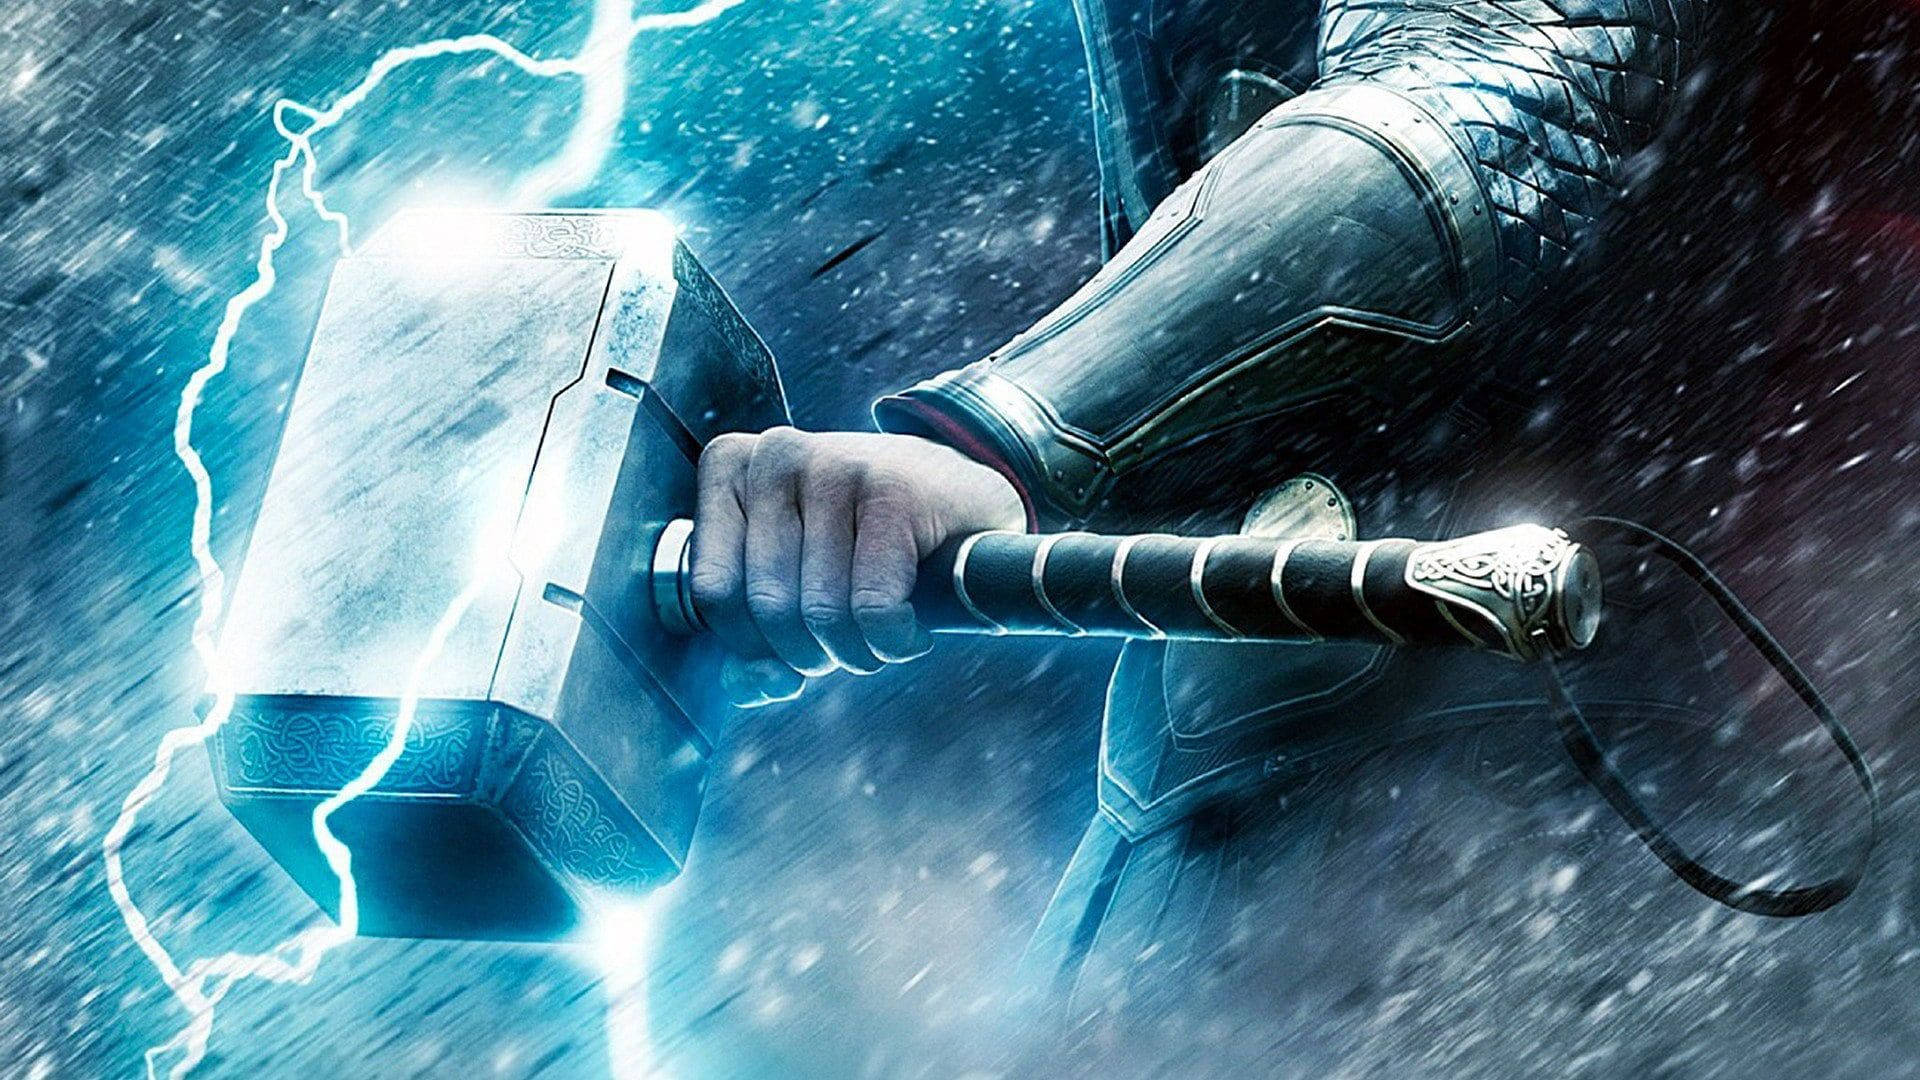 Cool Pictures Thor's Hammer Background